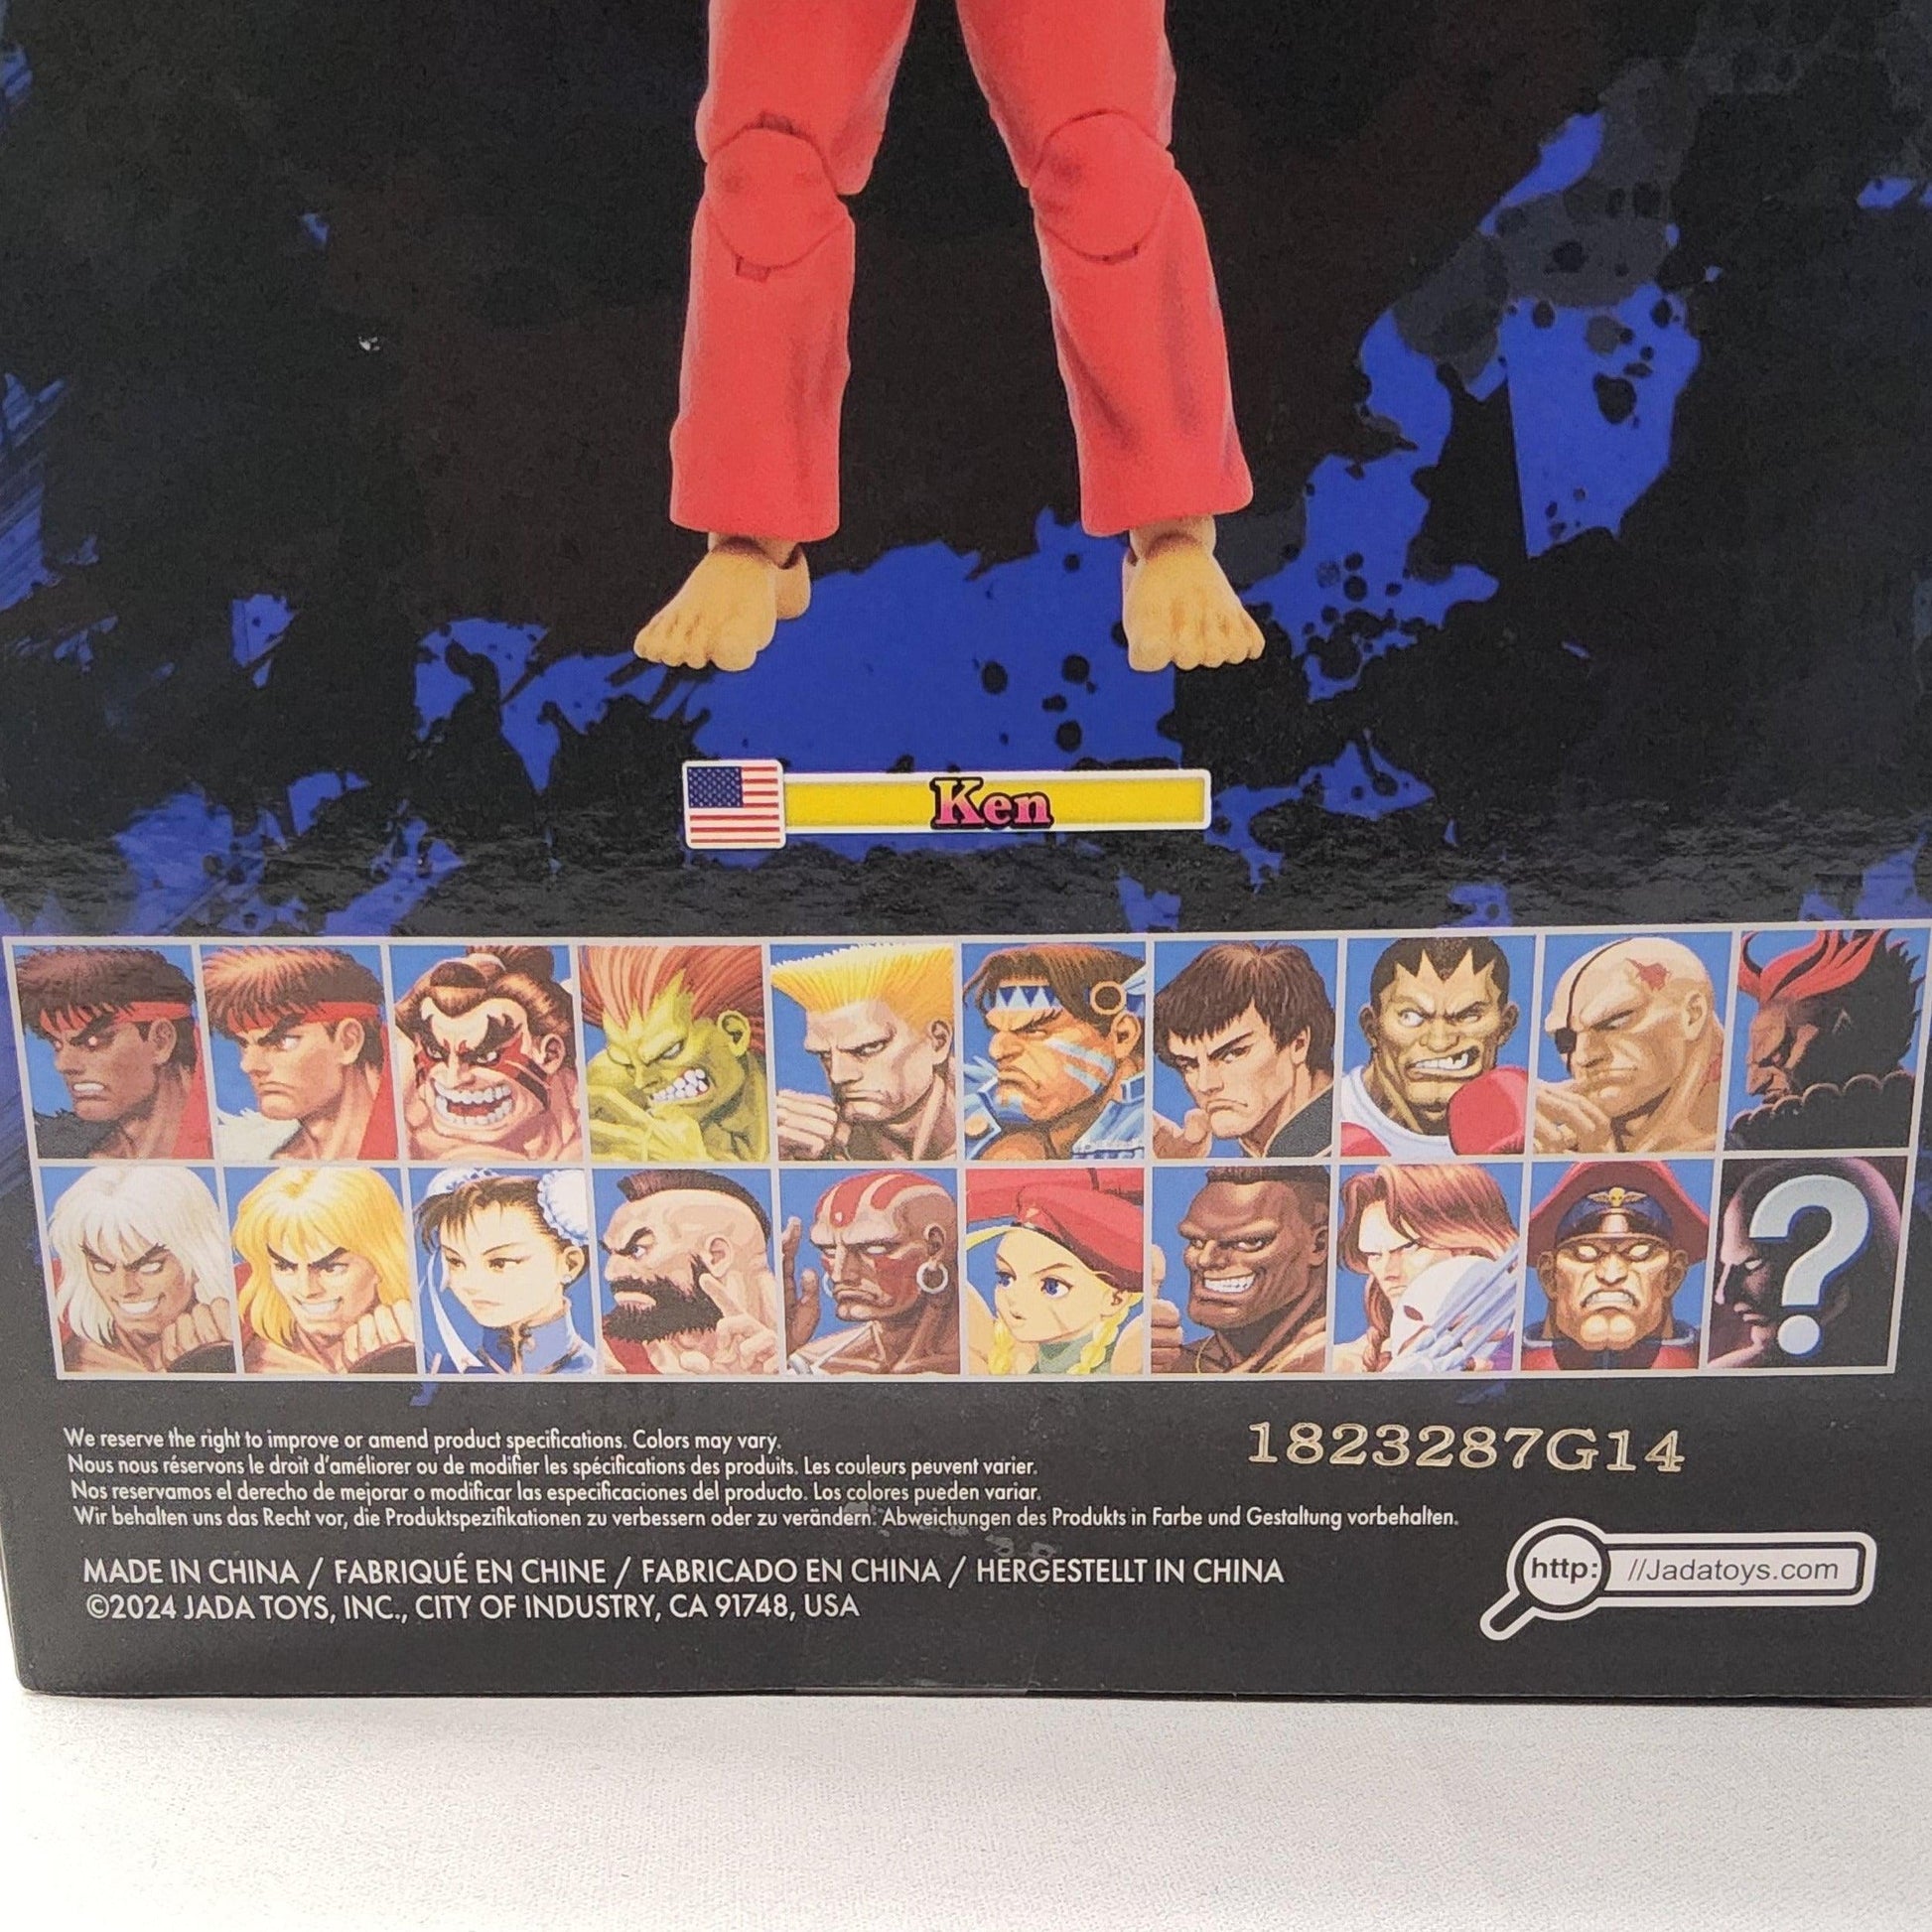 Ken 6" Ultra Street Fighter II: The Final Challengers Video Game Action Figure - Logan's Toy Chest